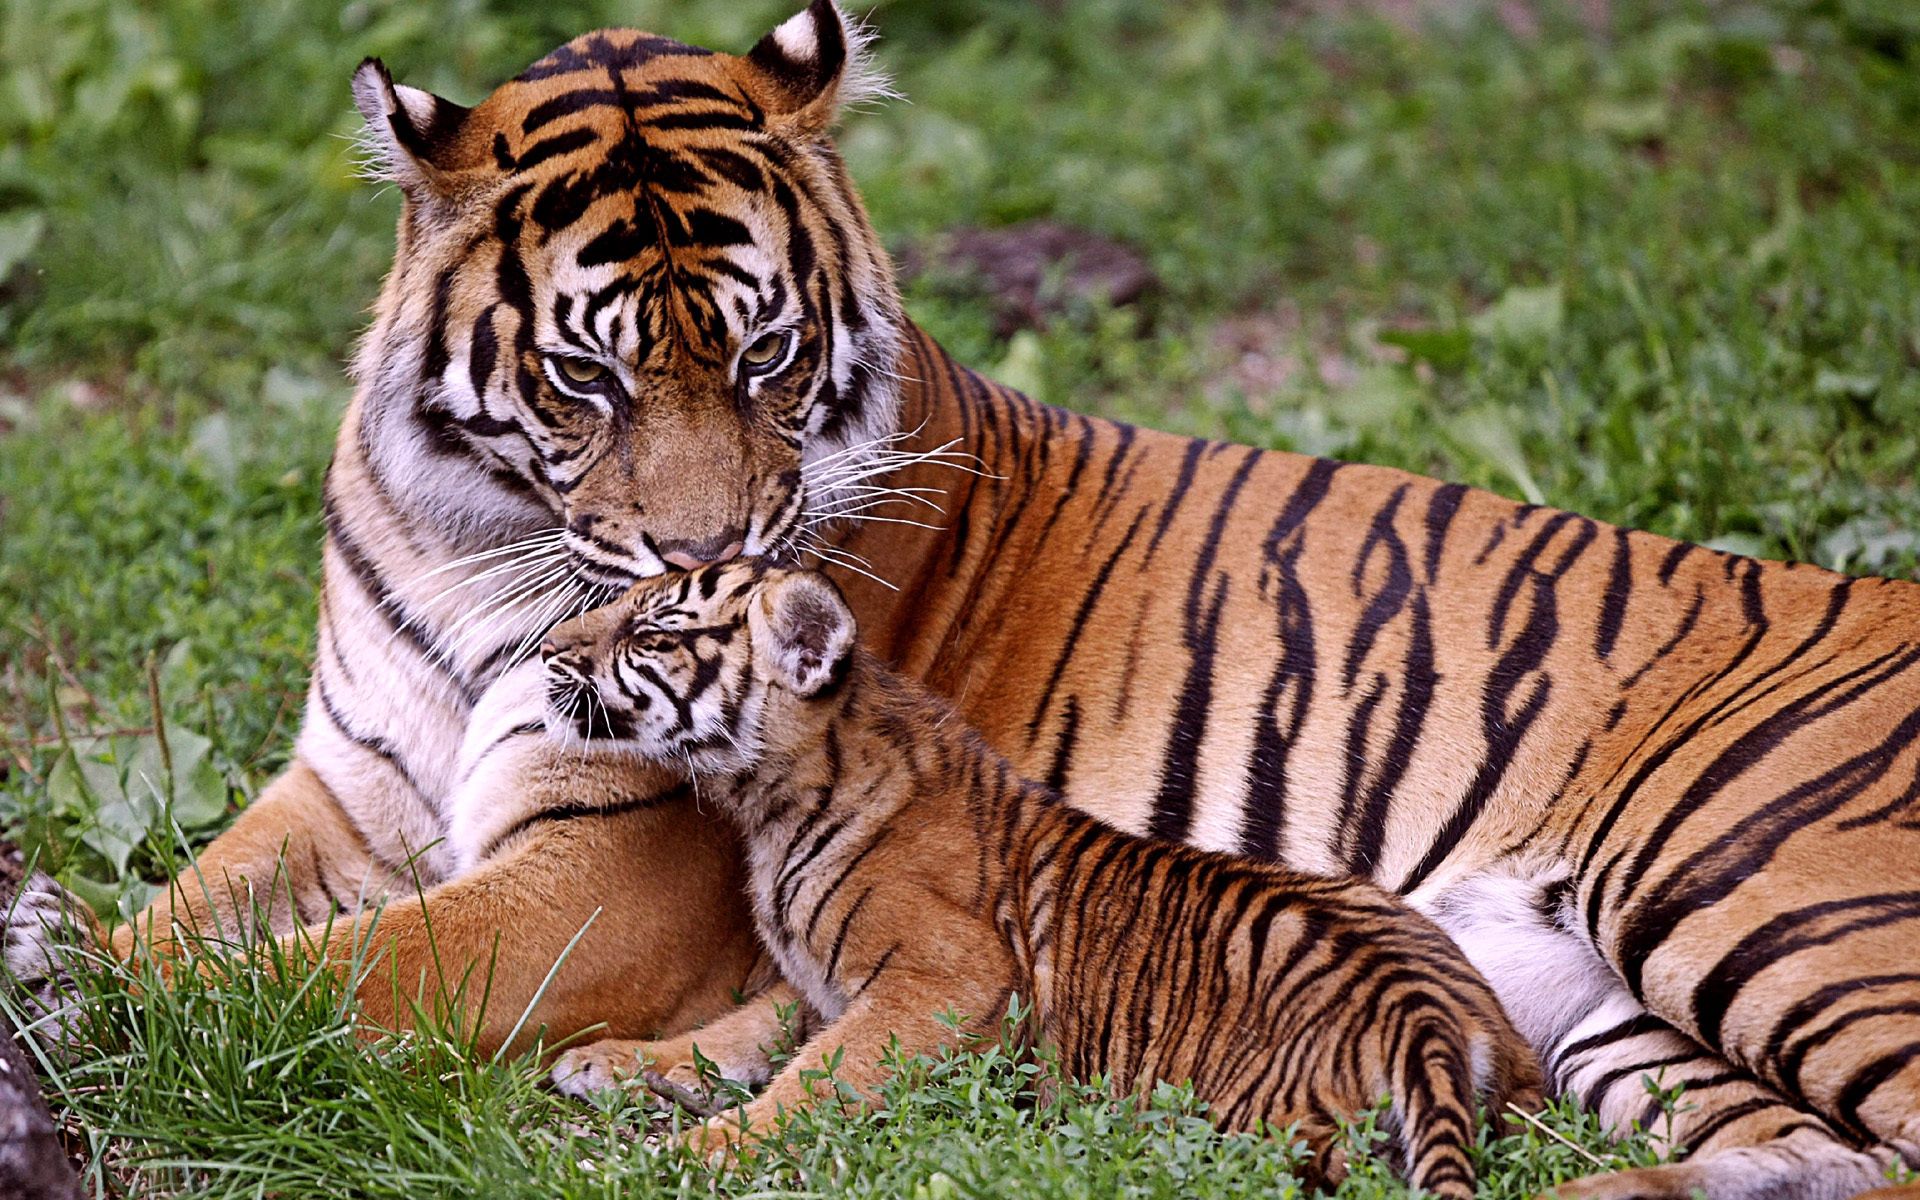 care, grass, young, animals, to lie down, lie, tiger, joey, tiger cub